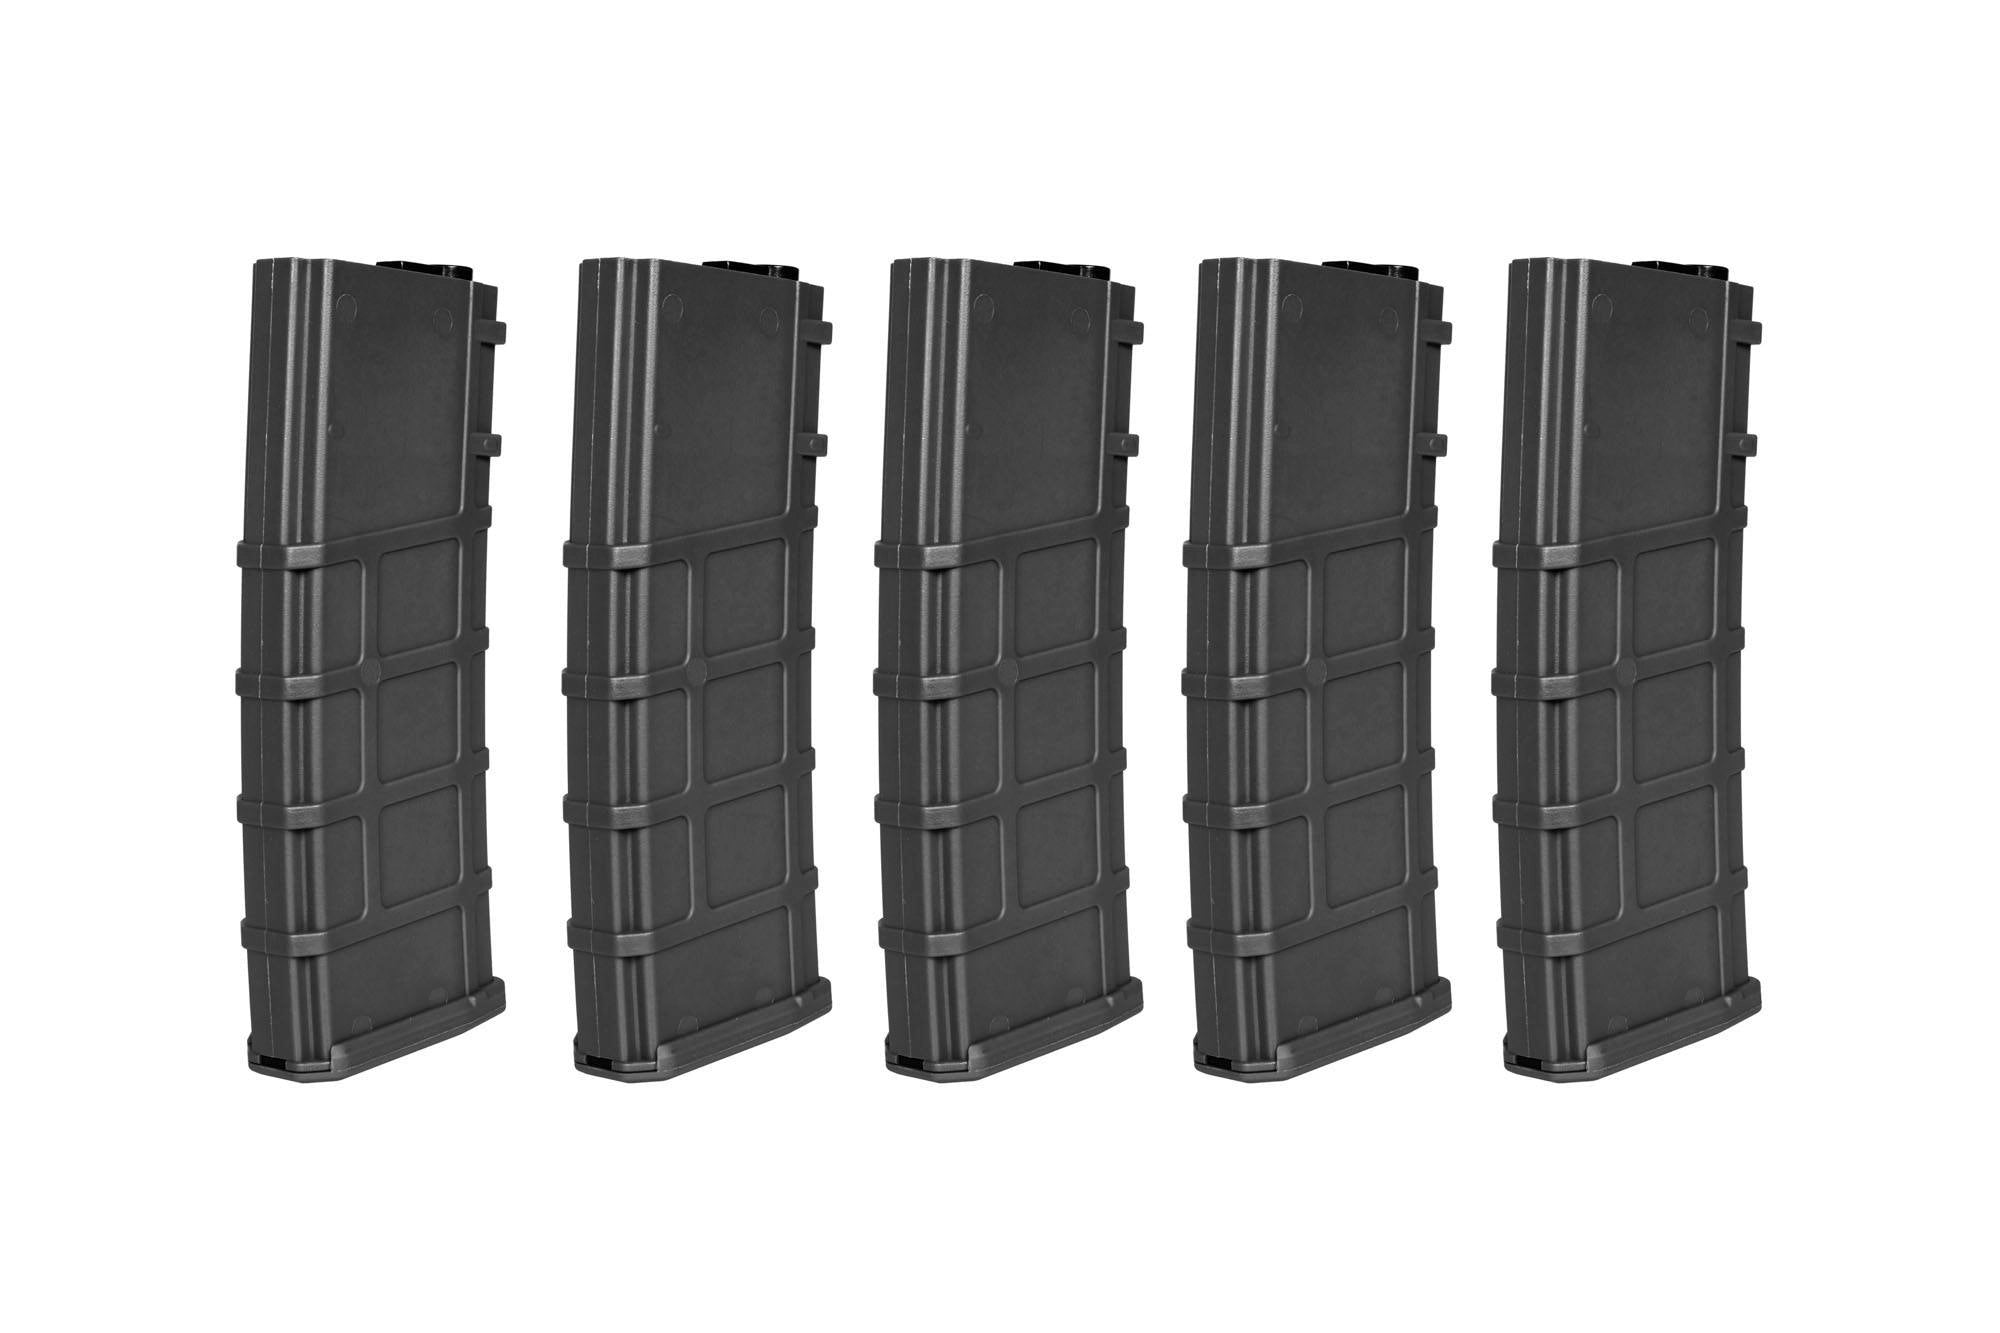 Set of 5 Polymer 200 BB's Mid-Cap magazines for M4/M16 replicas - Black-1